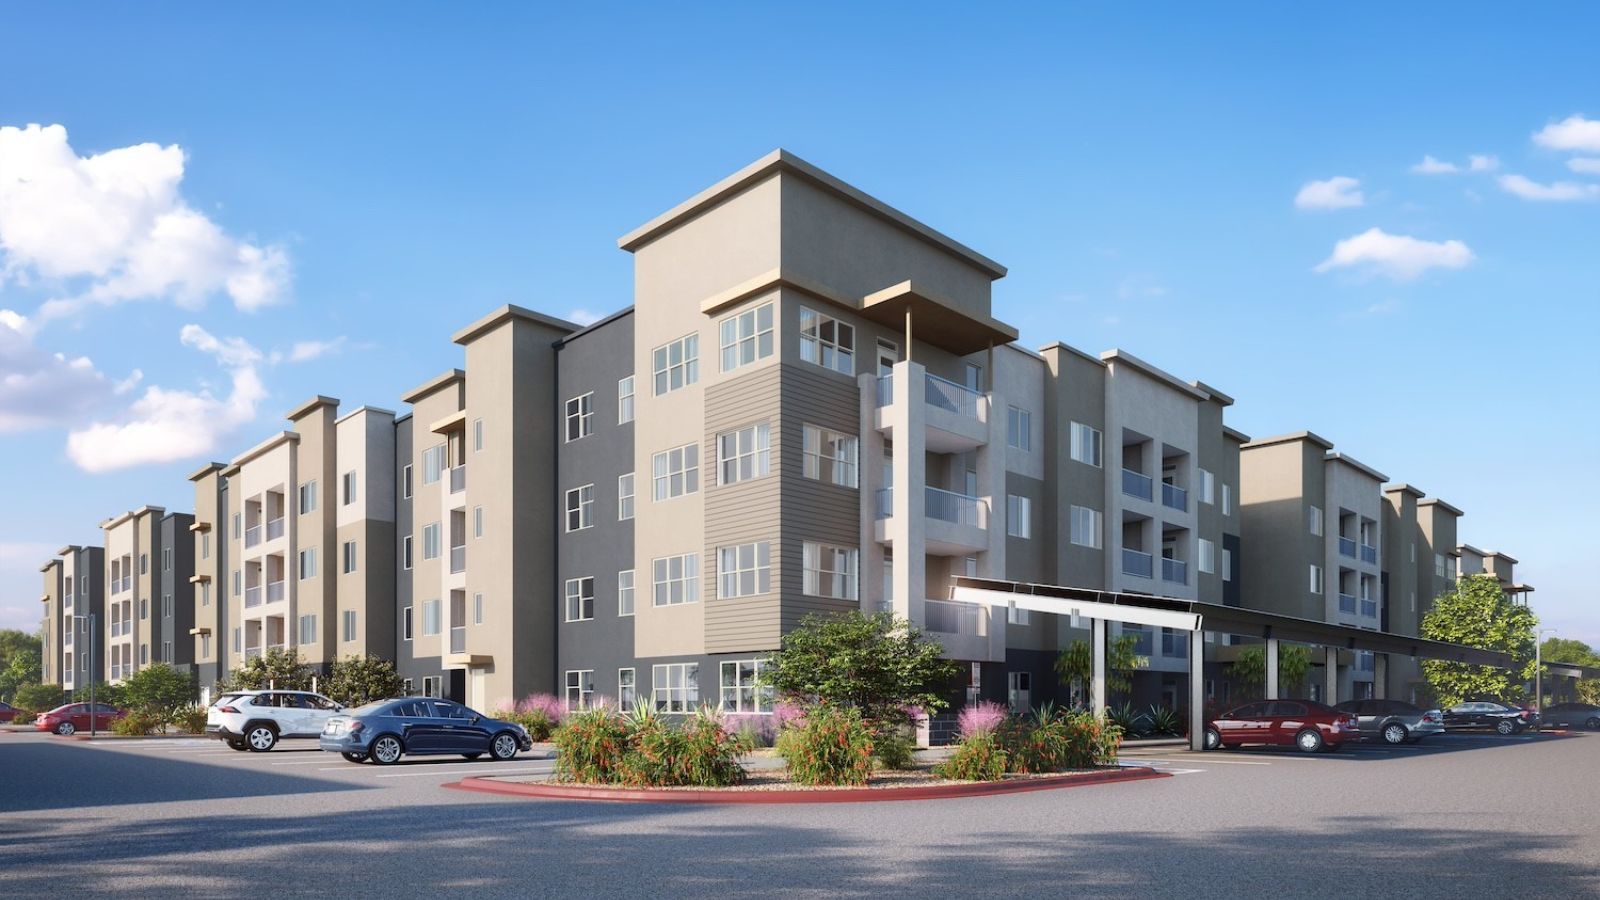 Affordable apartment units to go up in Glendale for families, seniors...